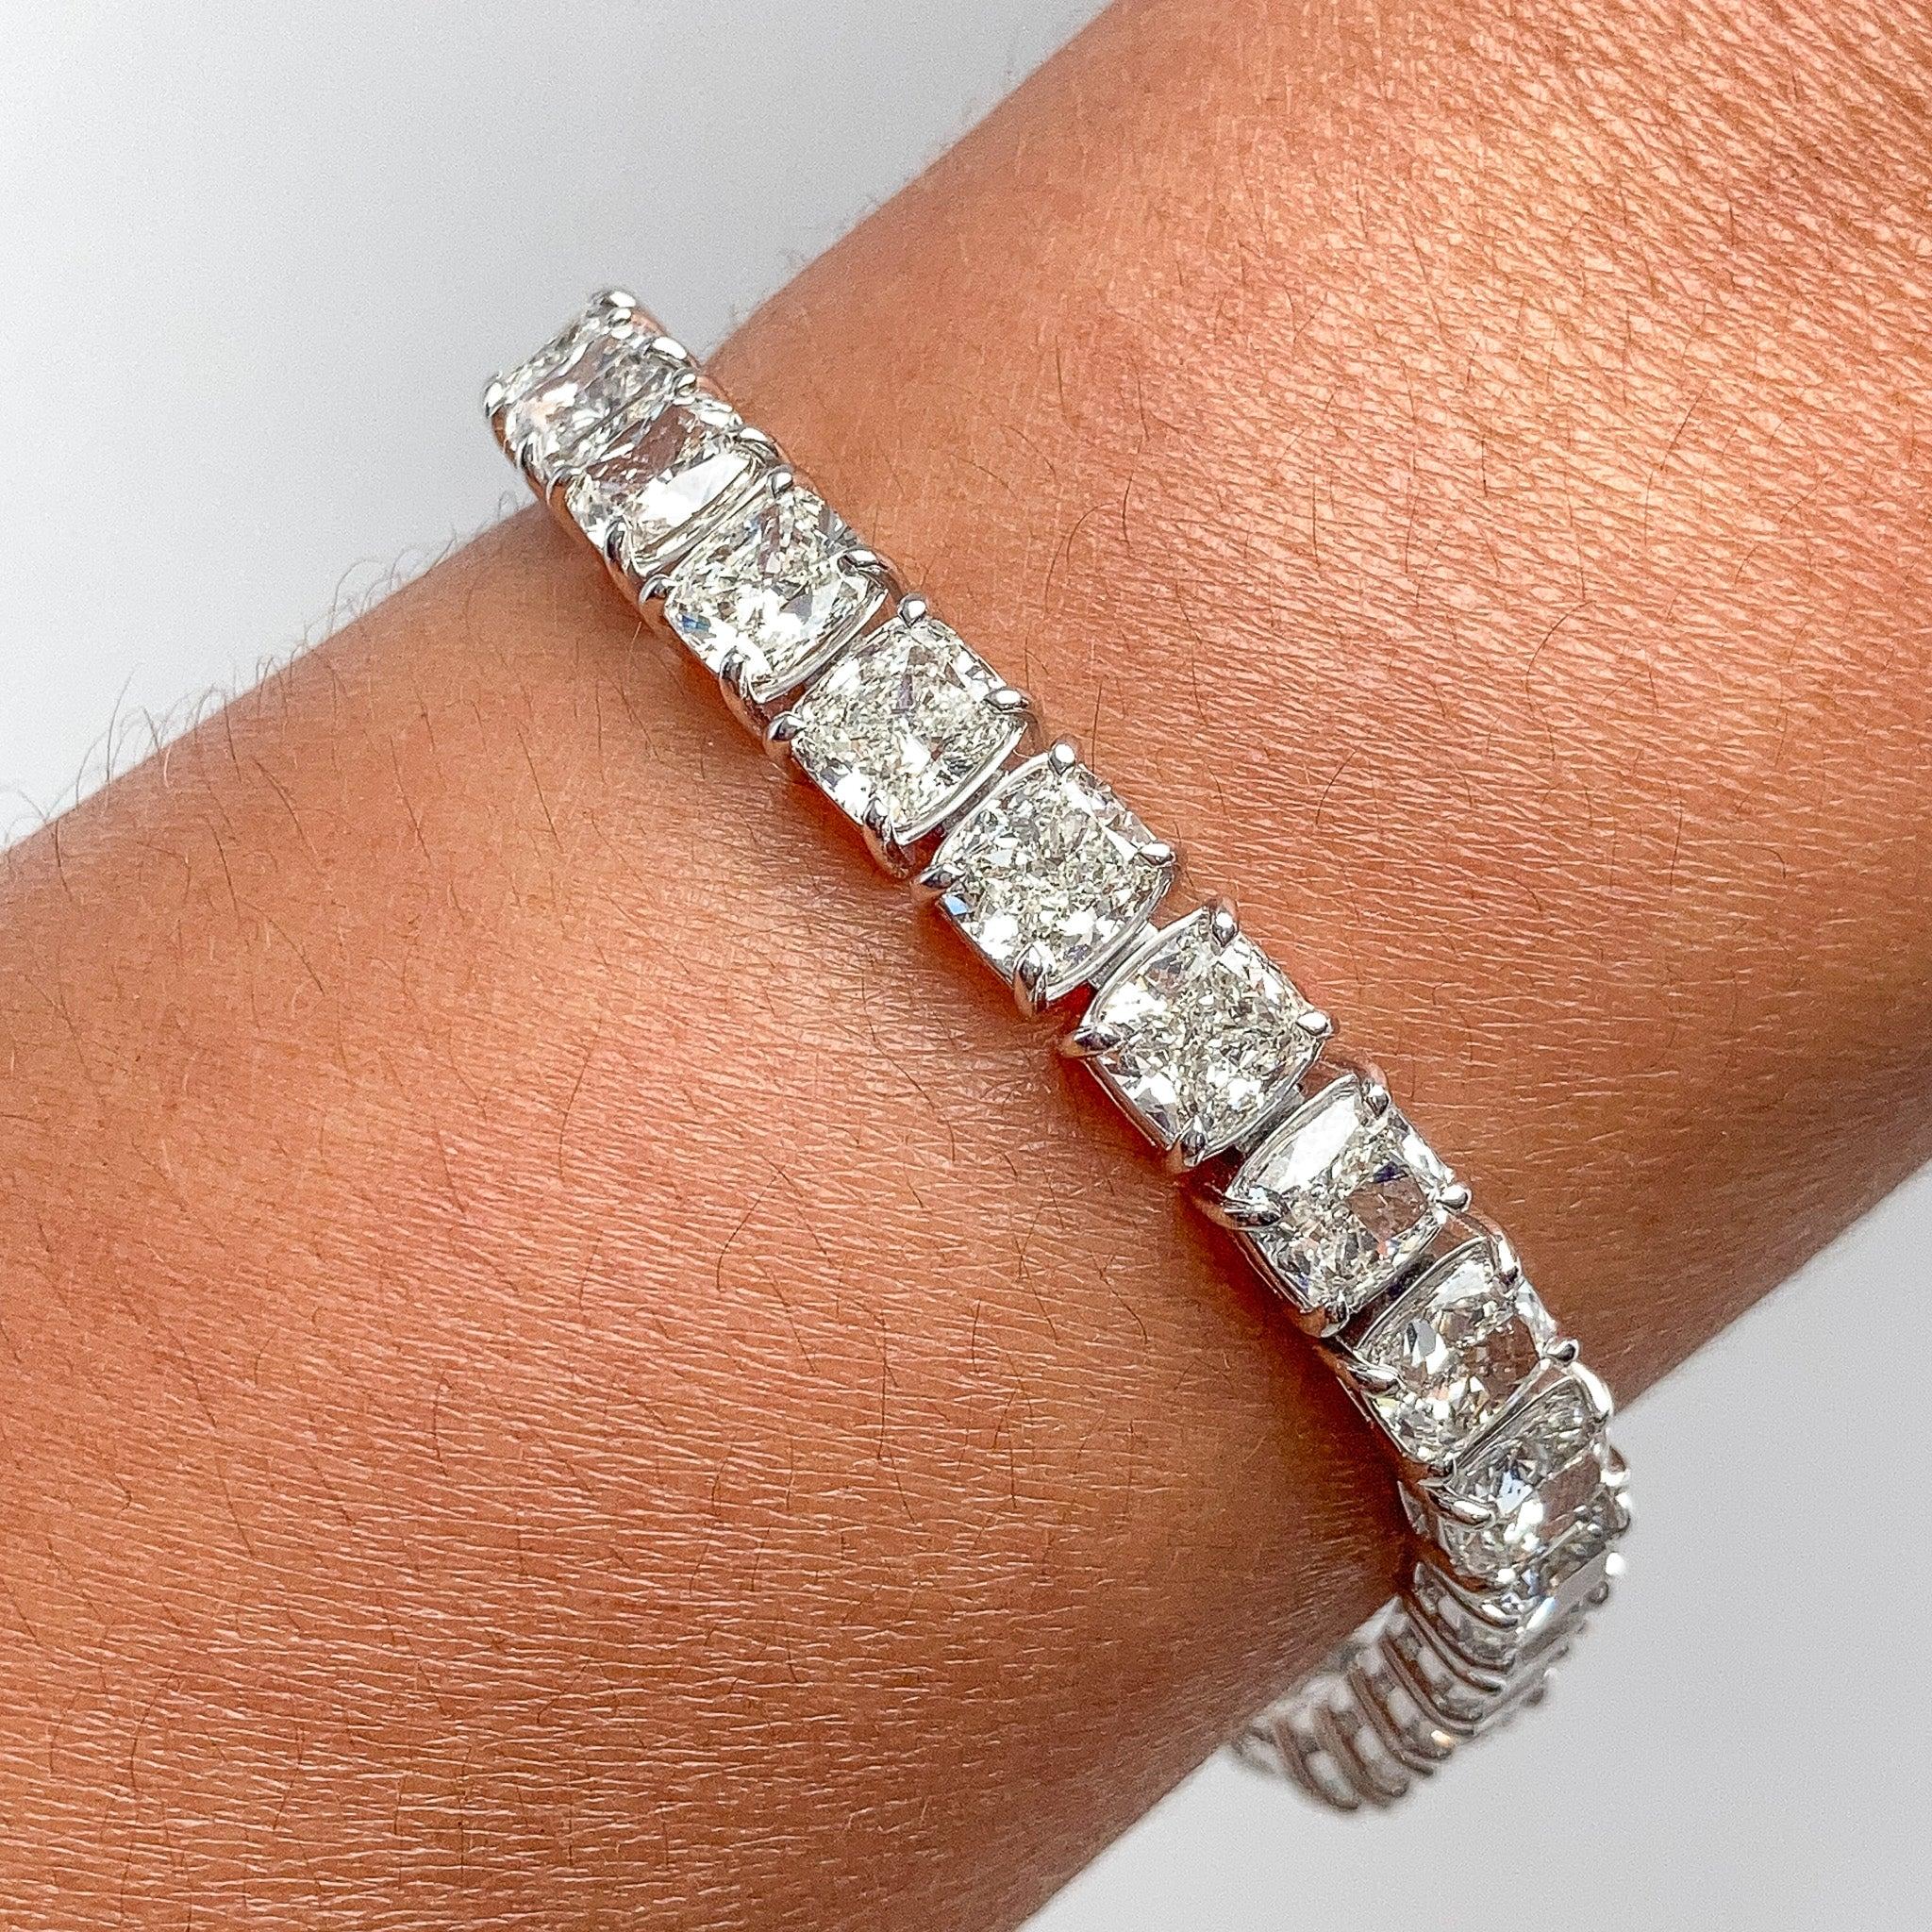 Platinum tennis bracelet adorned with 30 diamonds, totaling 30.17 carats. Each diamond weights over one carat.   The diamonds showcase are H to I in color reflecting near colorless hues, and exhibit VVS2-SI1 clarity, every diamonds is accommodated